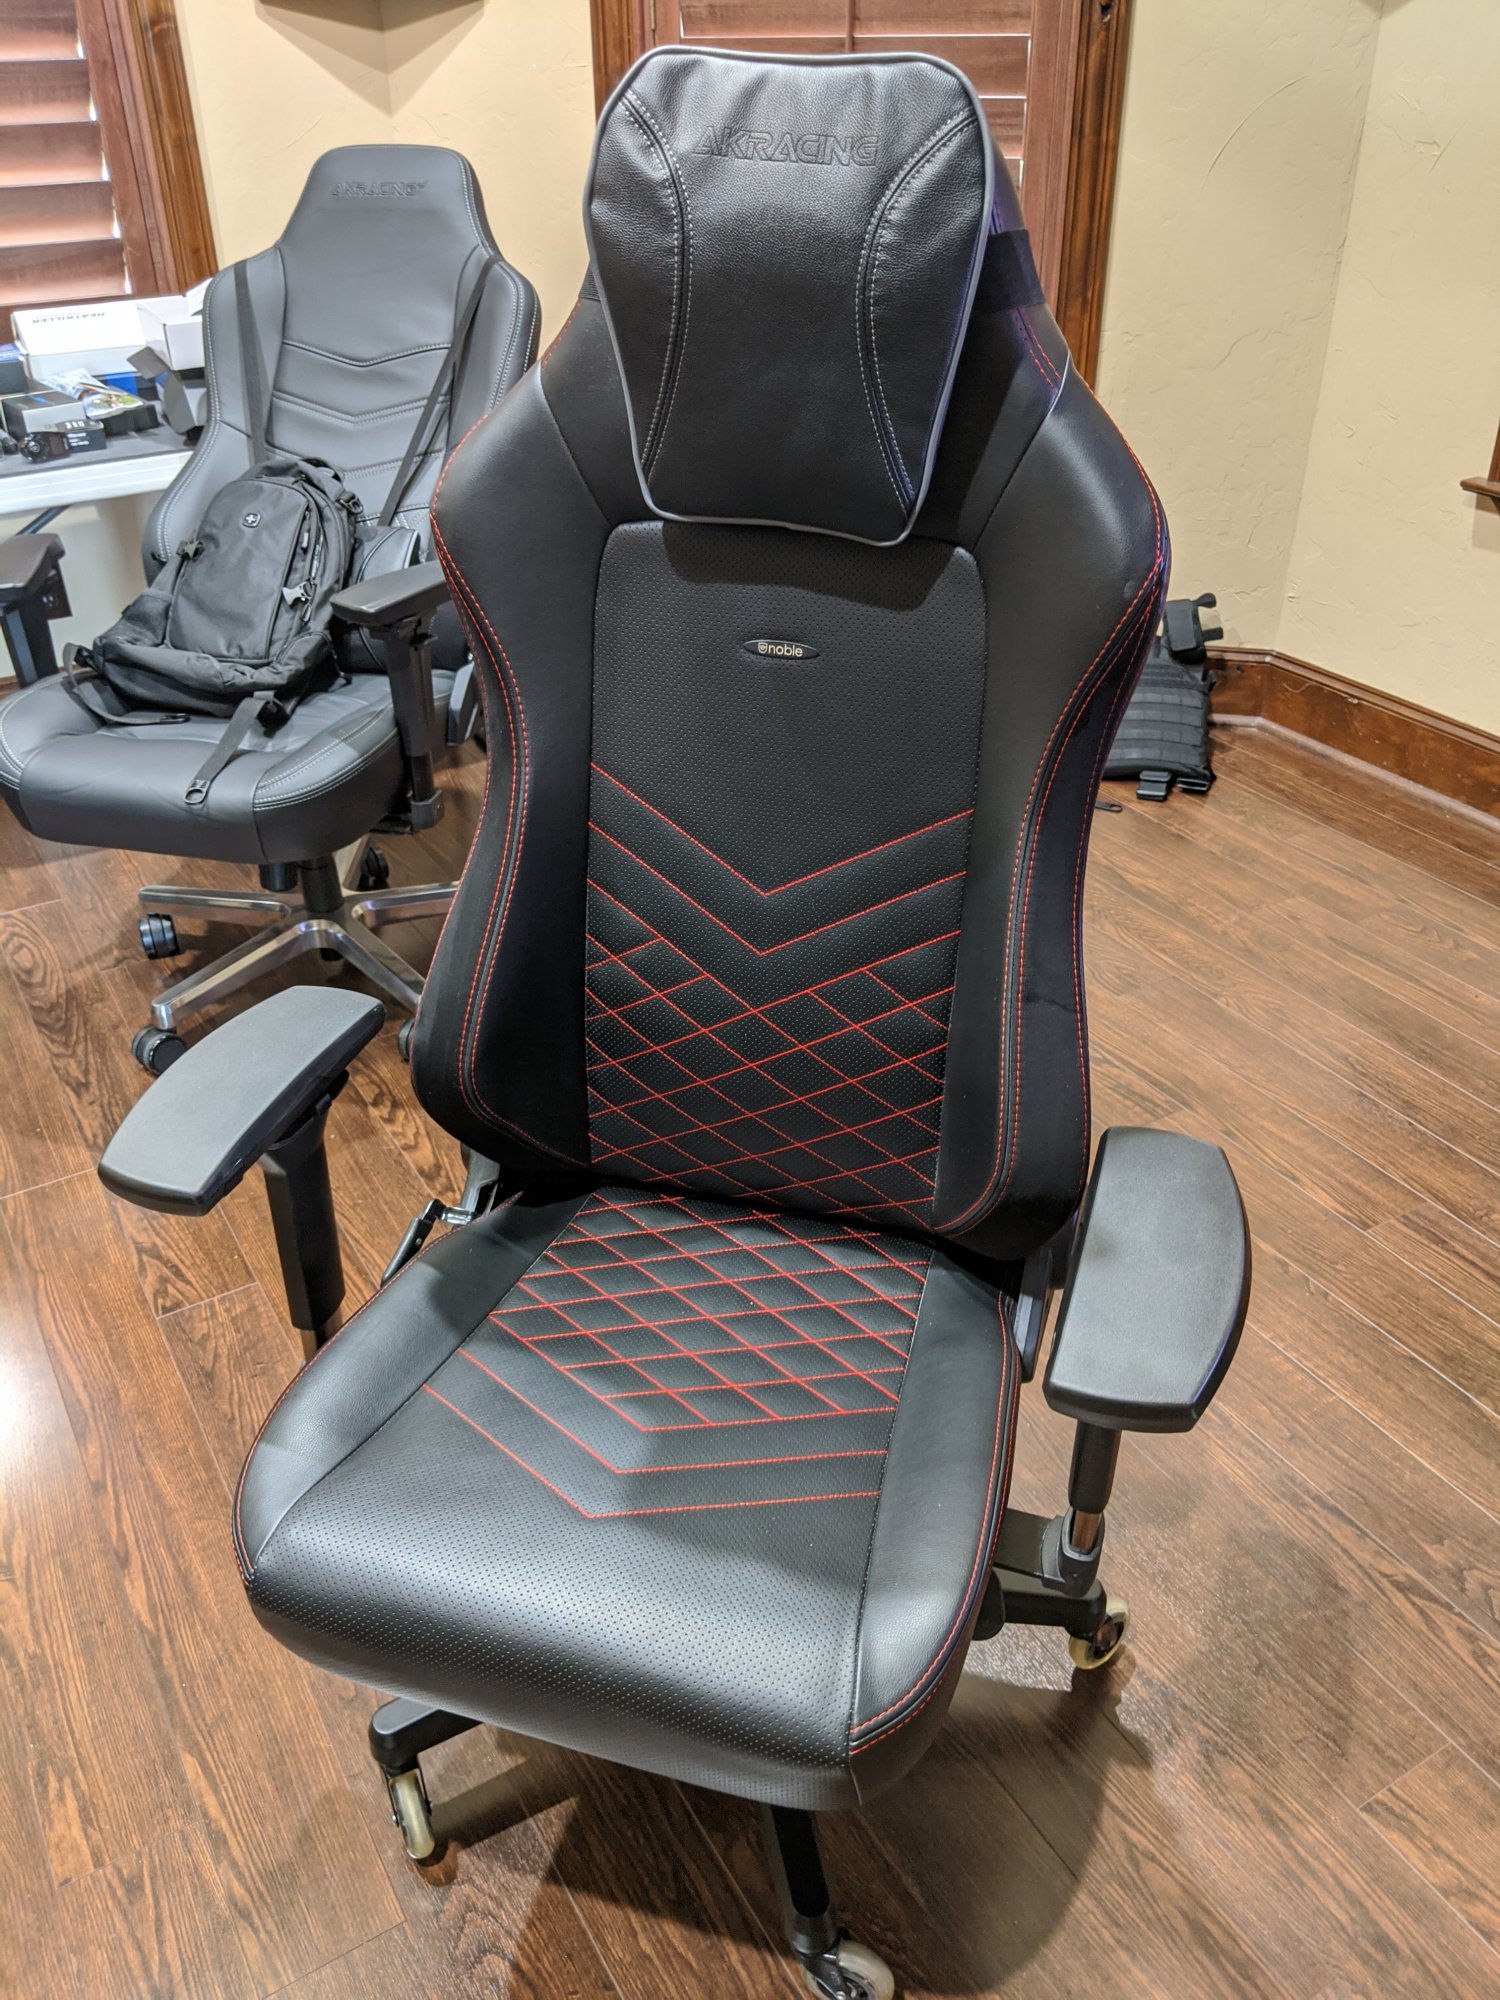 Looking for a gaming chair. | [H]ard|Forum